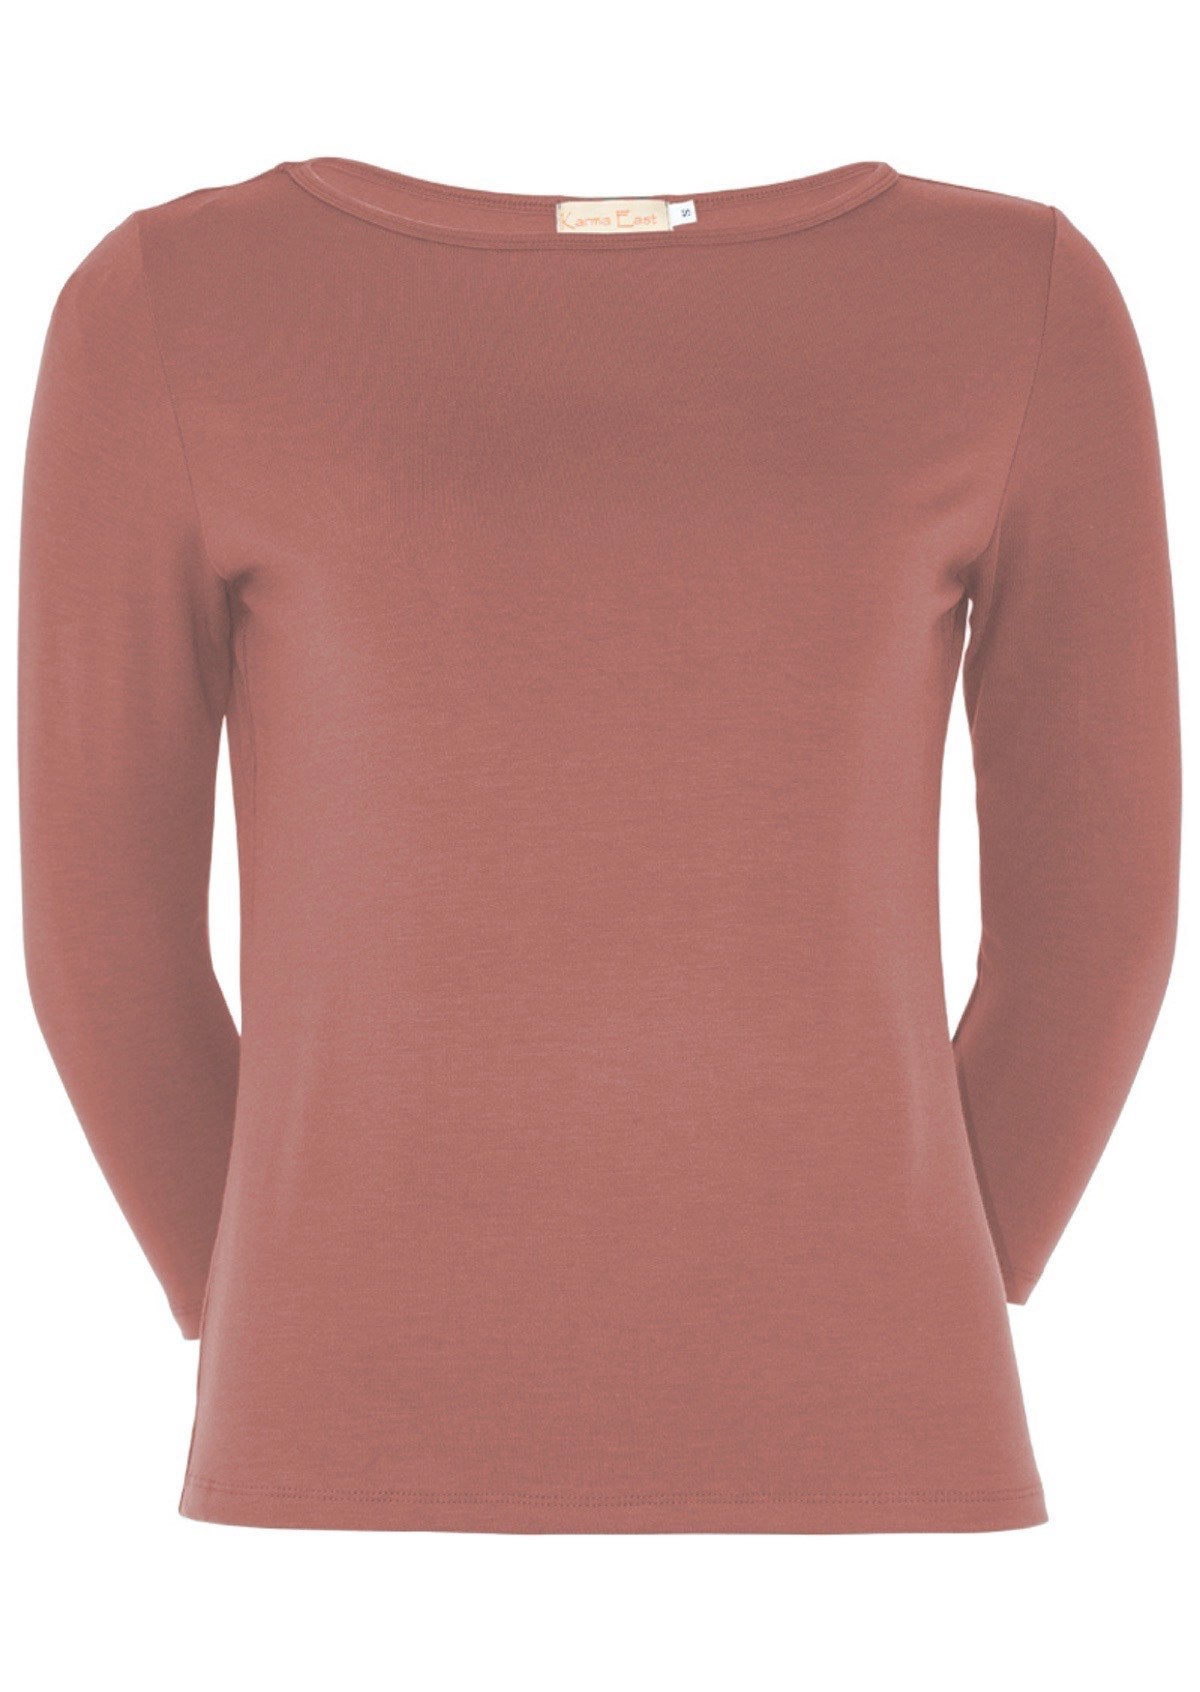 Front view of women's rayon boat neck dusty pink 3/4 sleeve top.